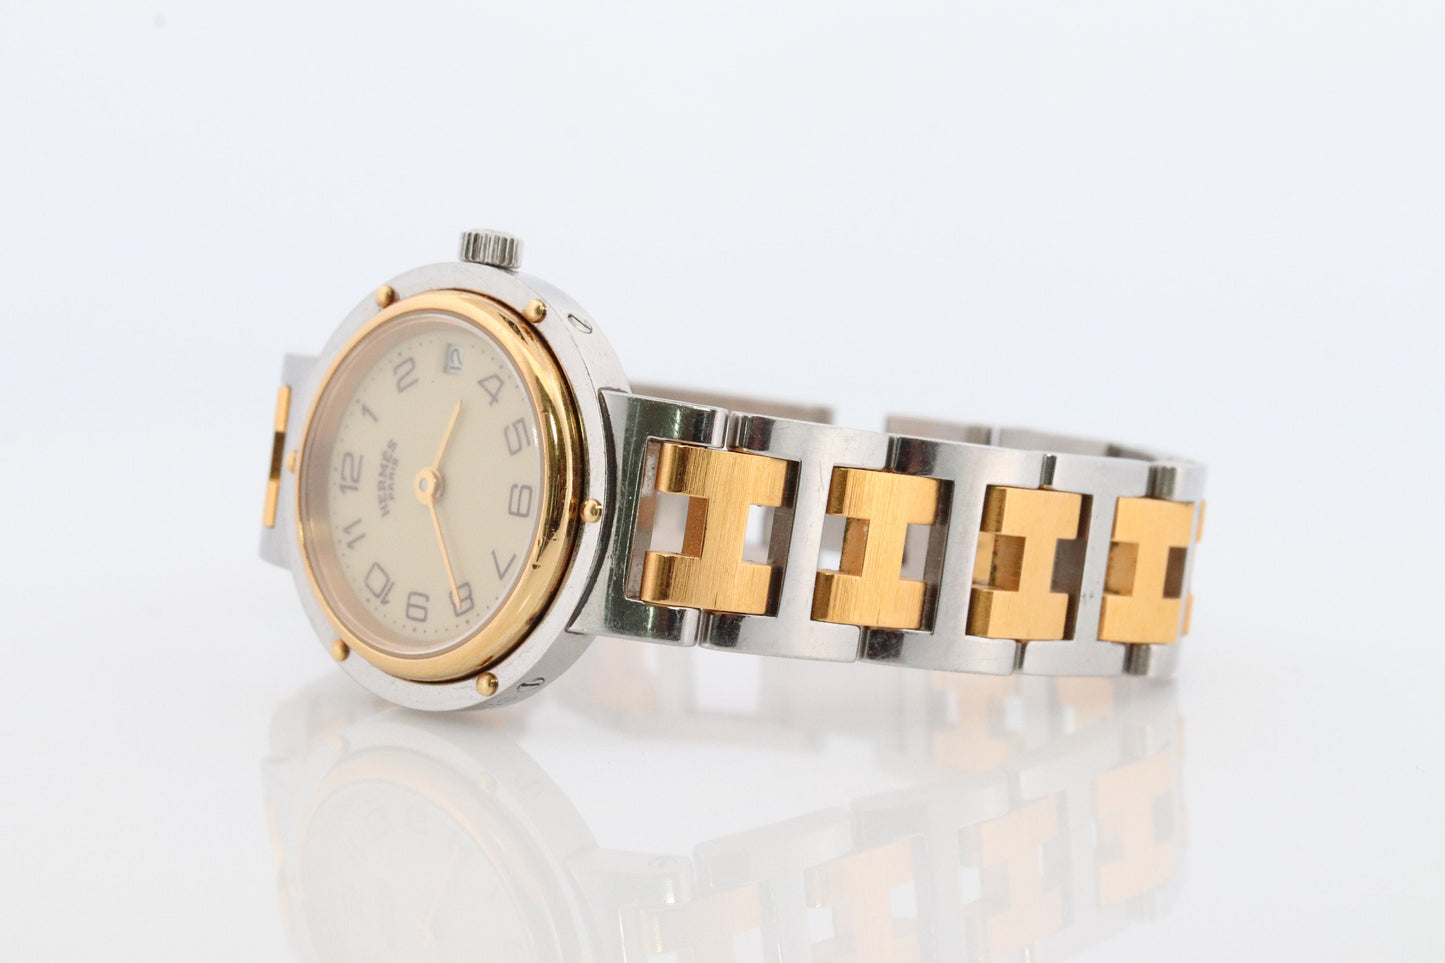 Hermes Watch. Ladies Genuine Hermes Clipper 514366 Gold and Silver Wristwatch.